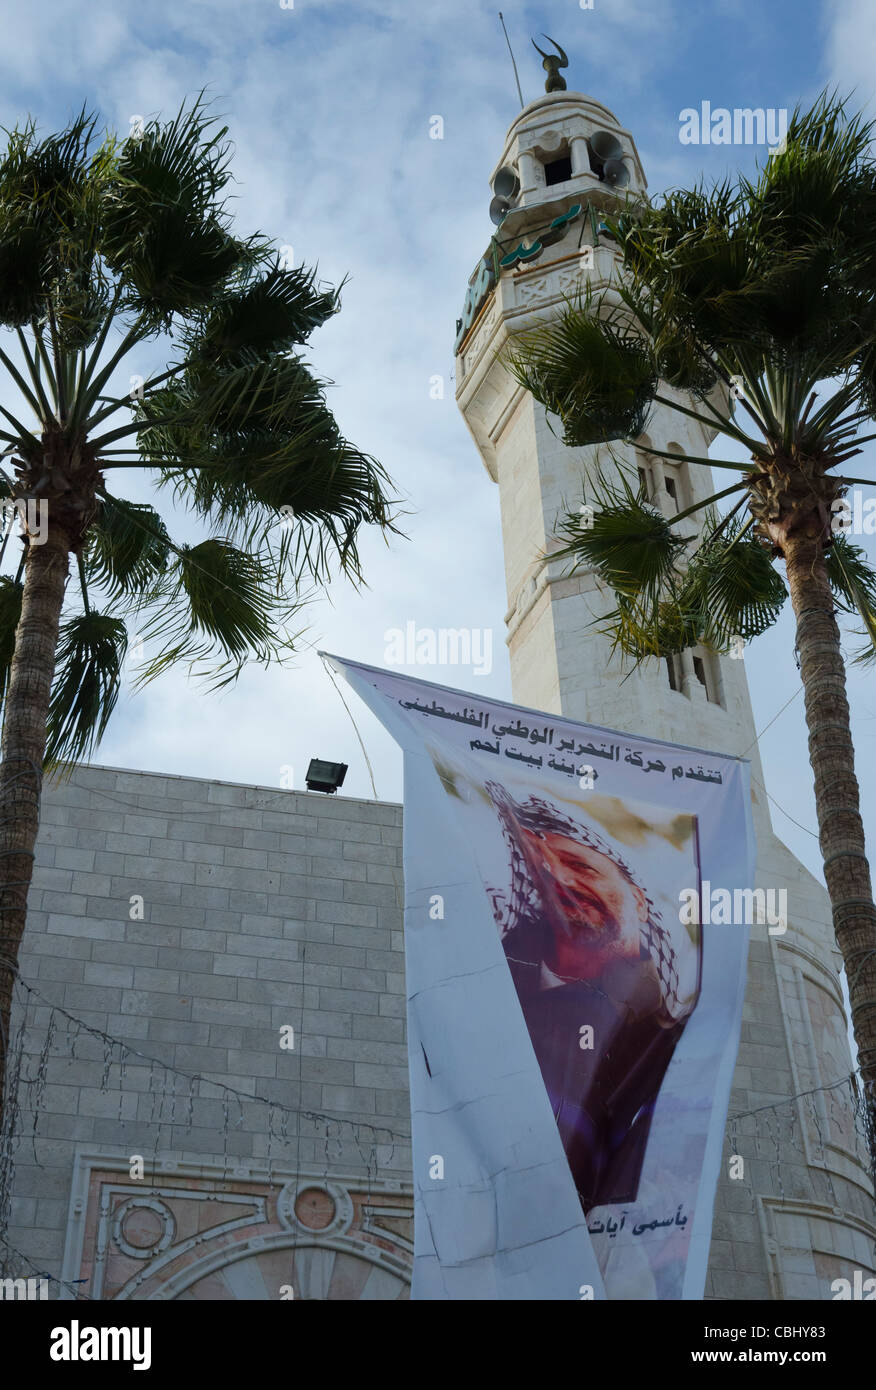 Poster of Y. Arafat hanging in the wind in front of Mosque. manger Square. bethlehem. palestinian authority Stock Photo